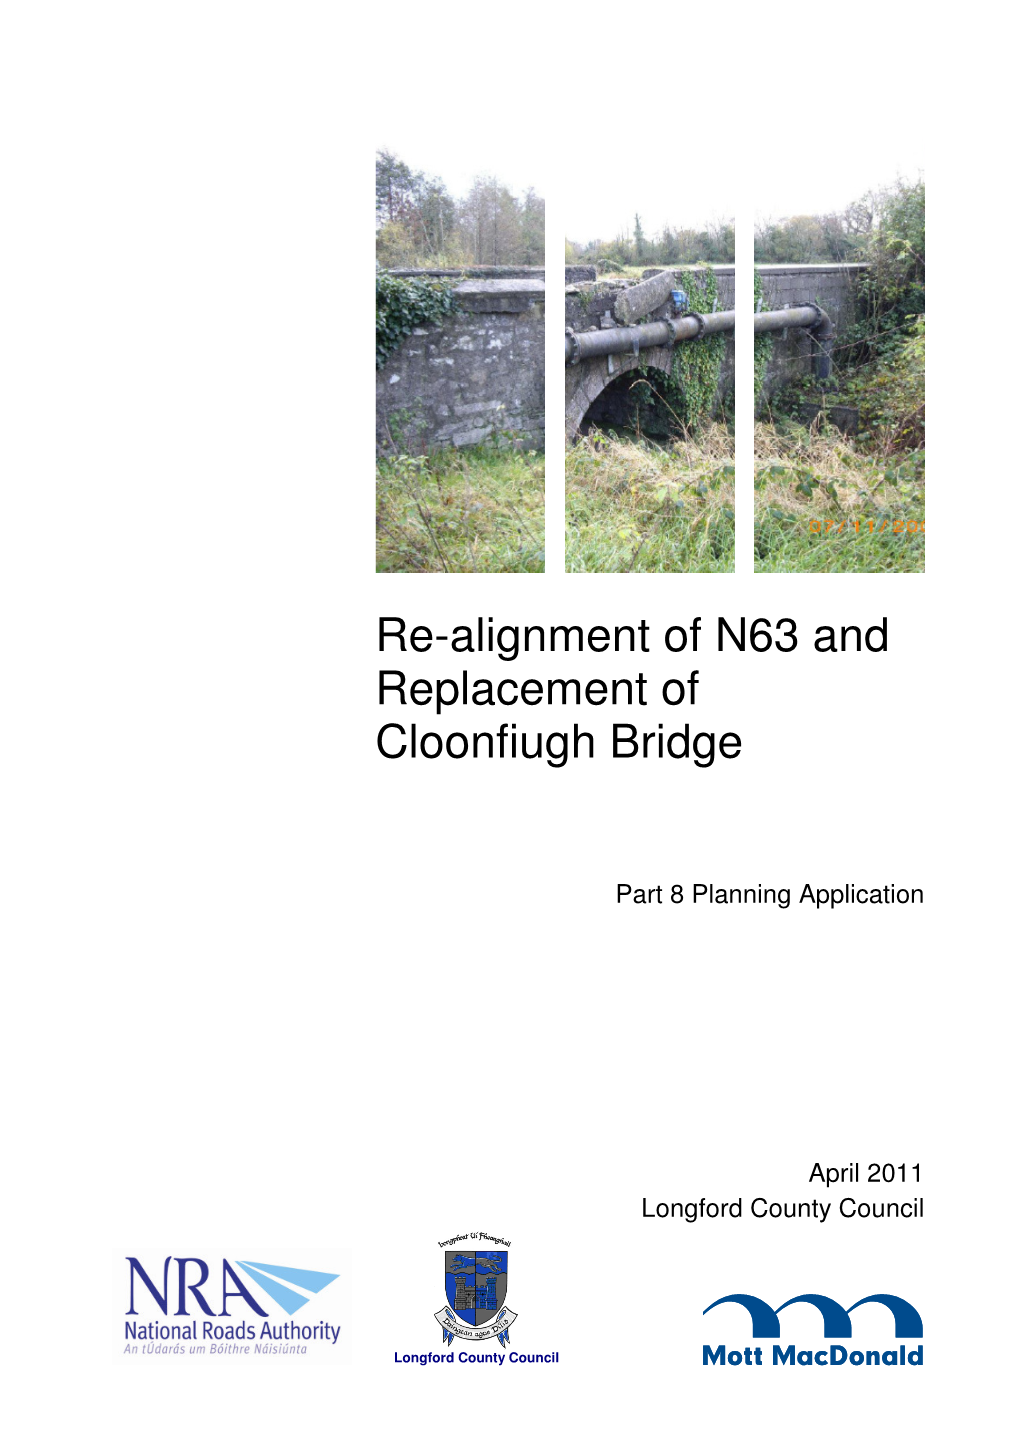 Re-Alignment of N63 and Replacement of Cloonfiugh Bridge